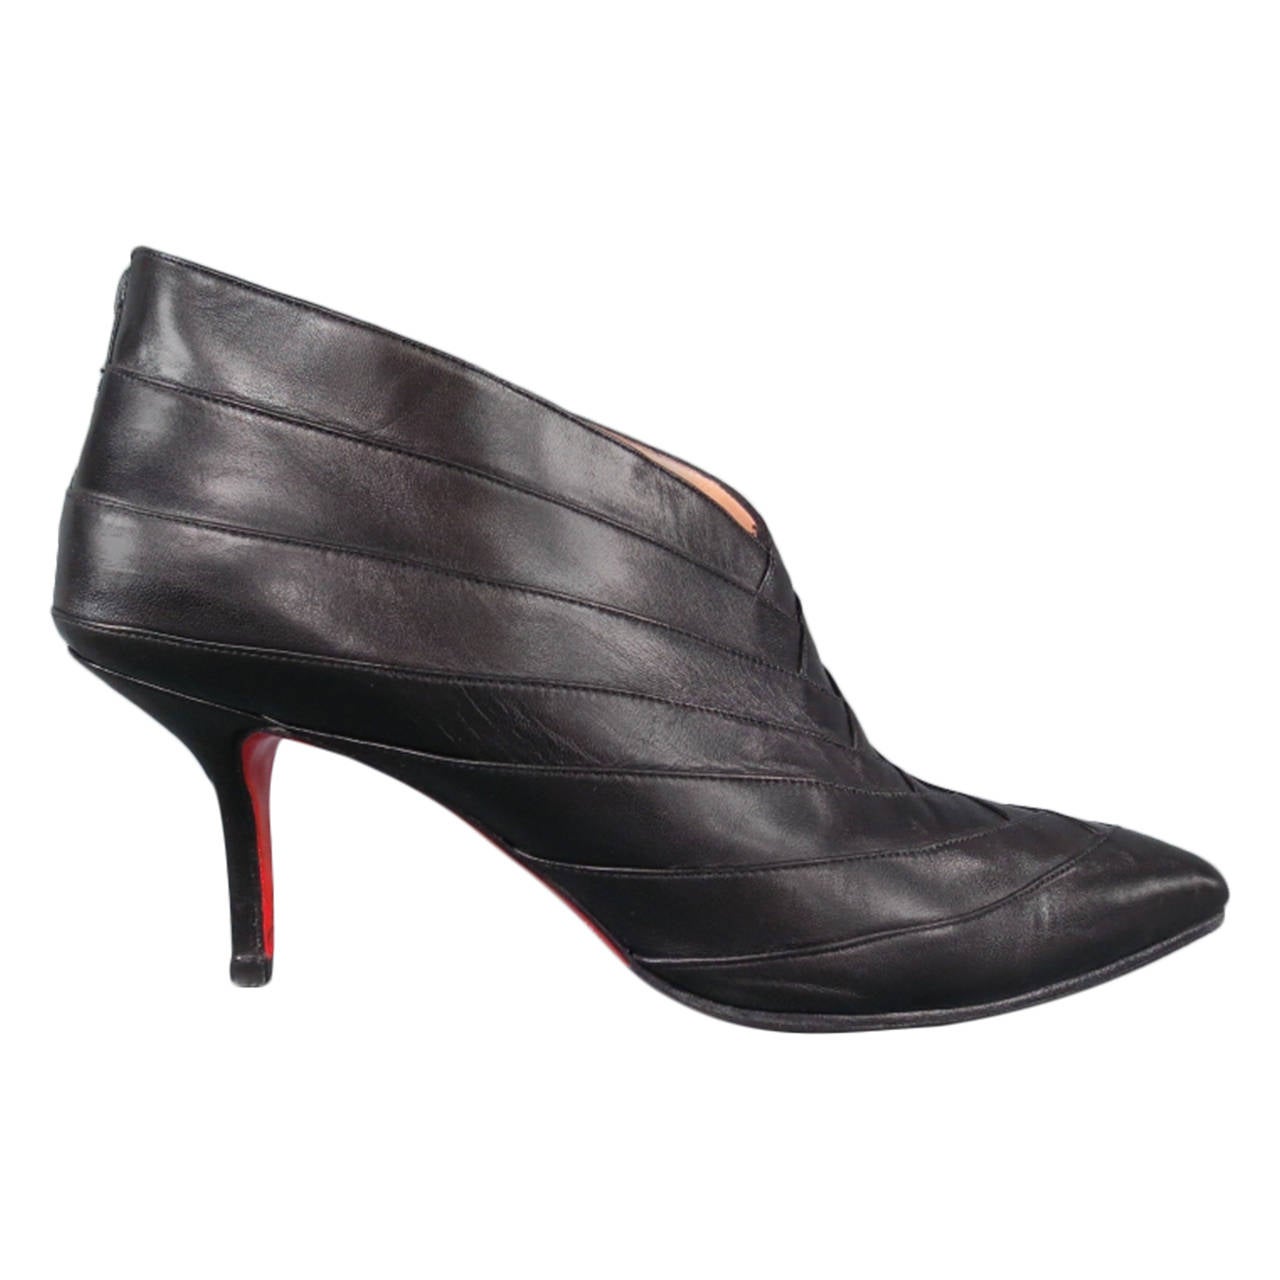 CHRISTIAN LOUBOUTIN Size 7.5 Black Layered Leather Pointed Toe Booties